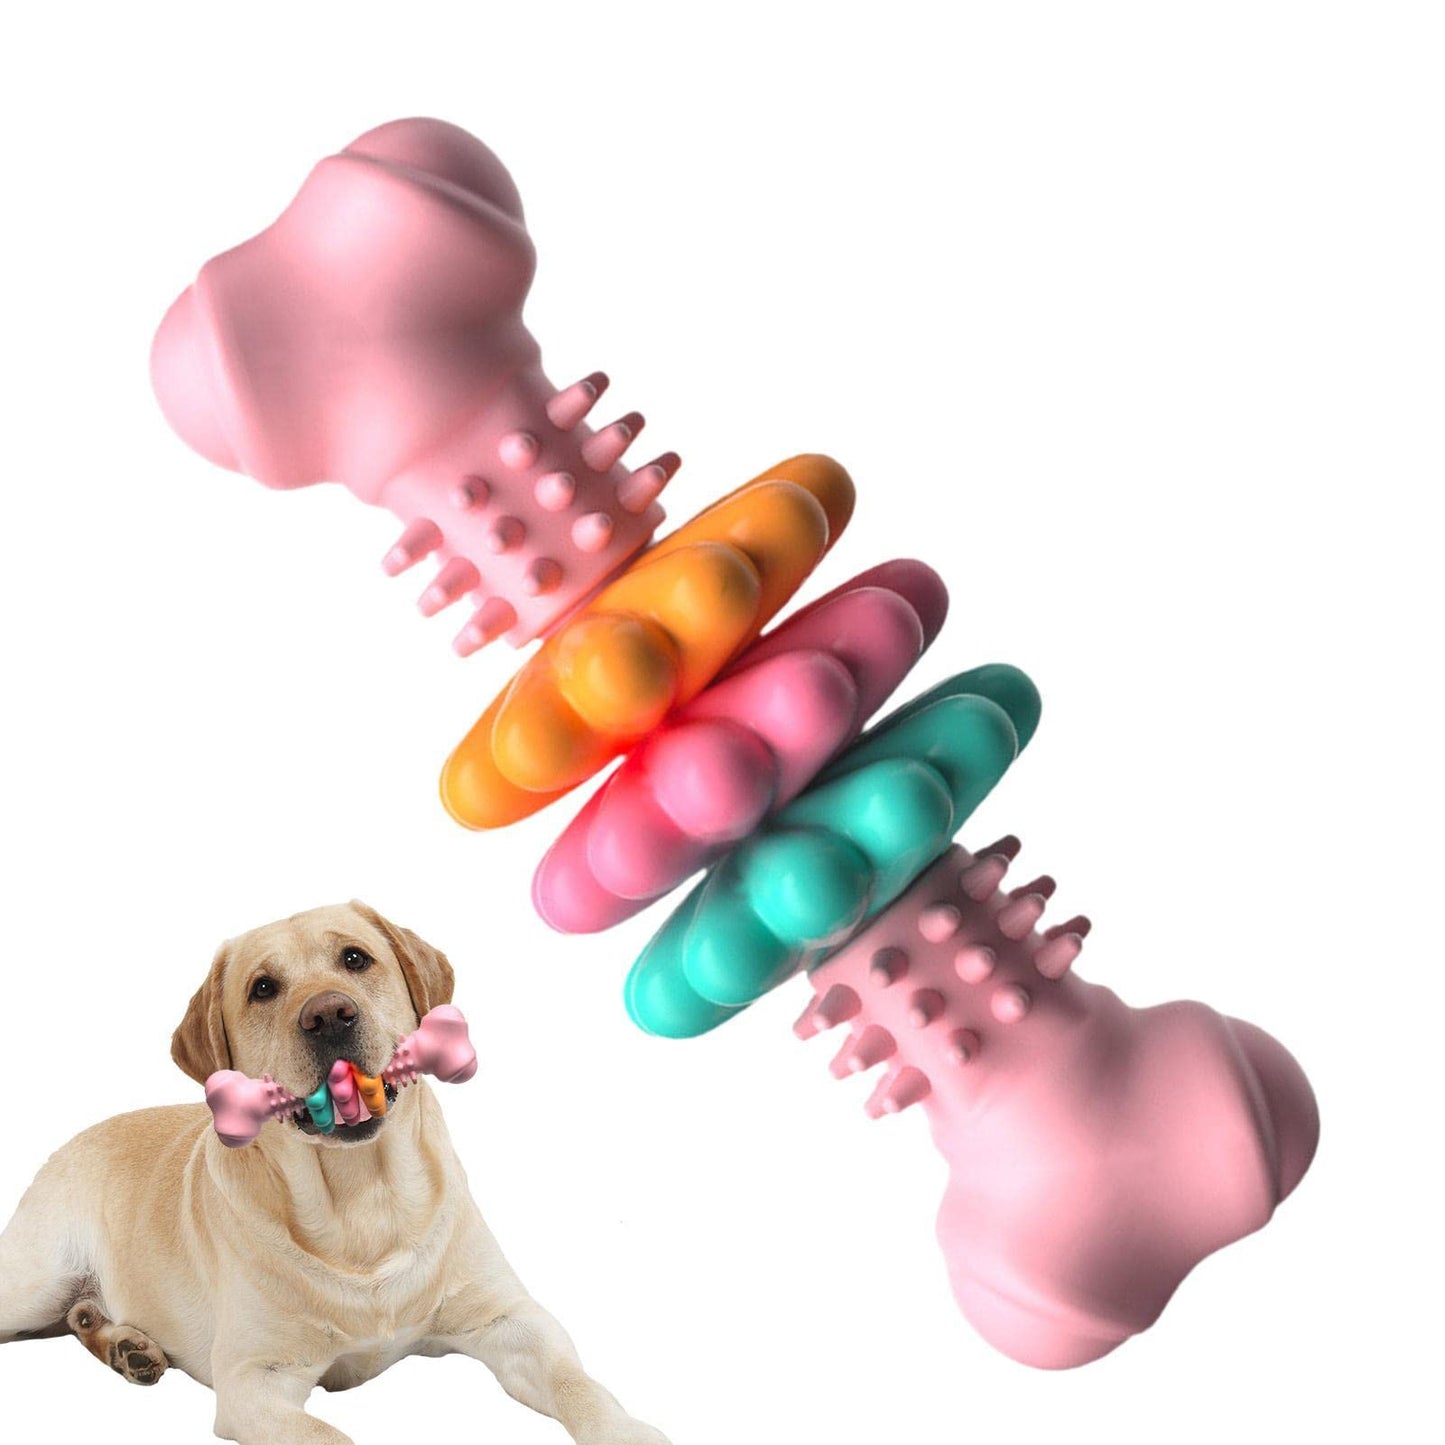 Dog Chew Toy Dog - Teeth Cleaning Toys Indestructible